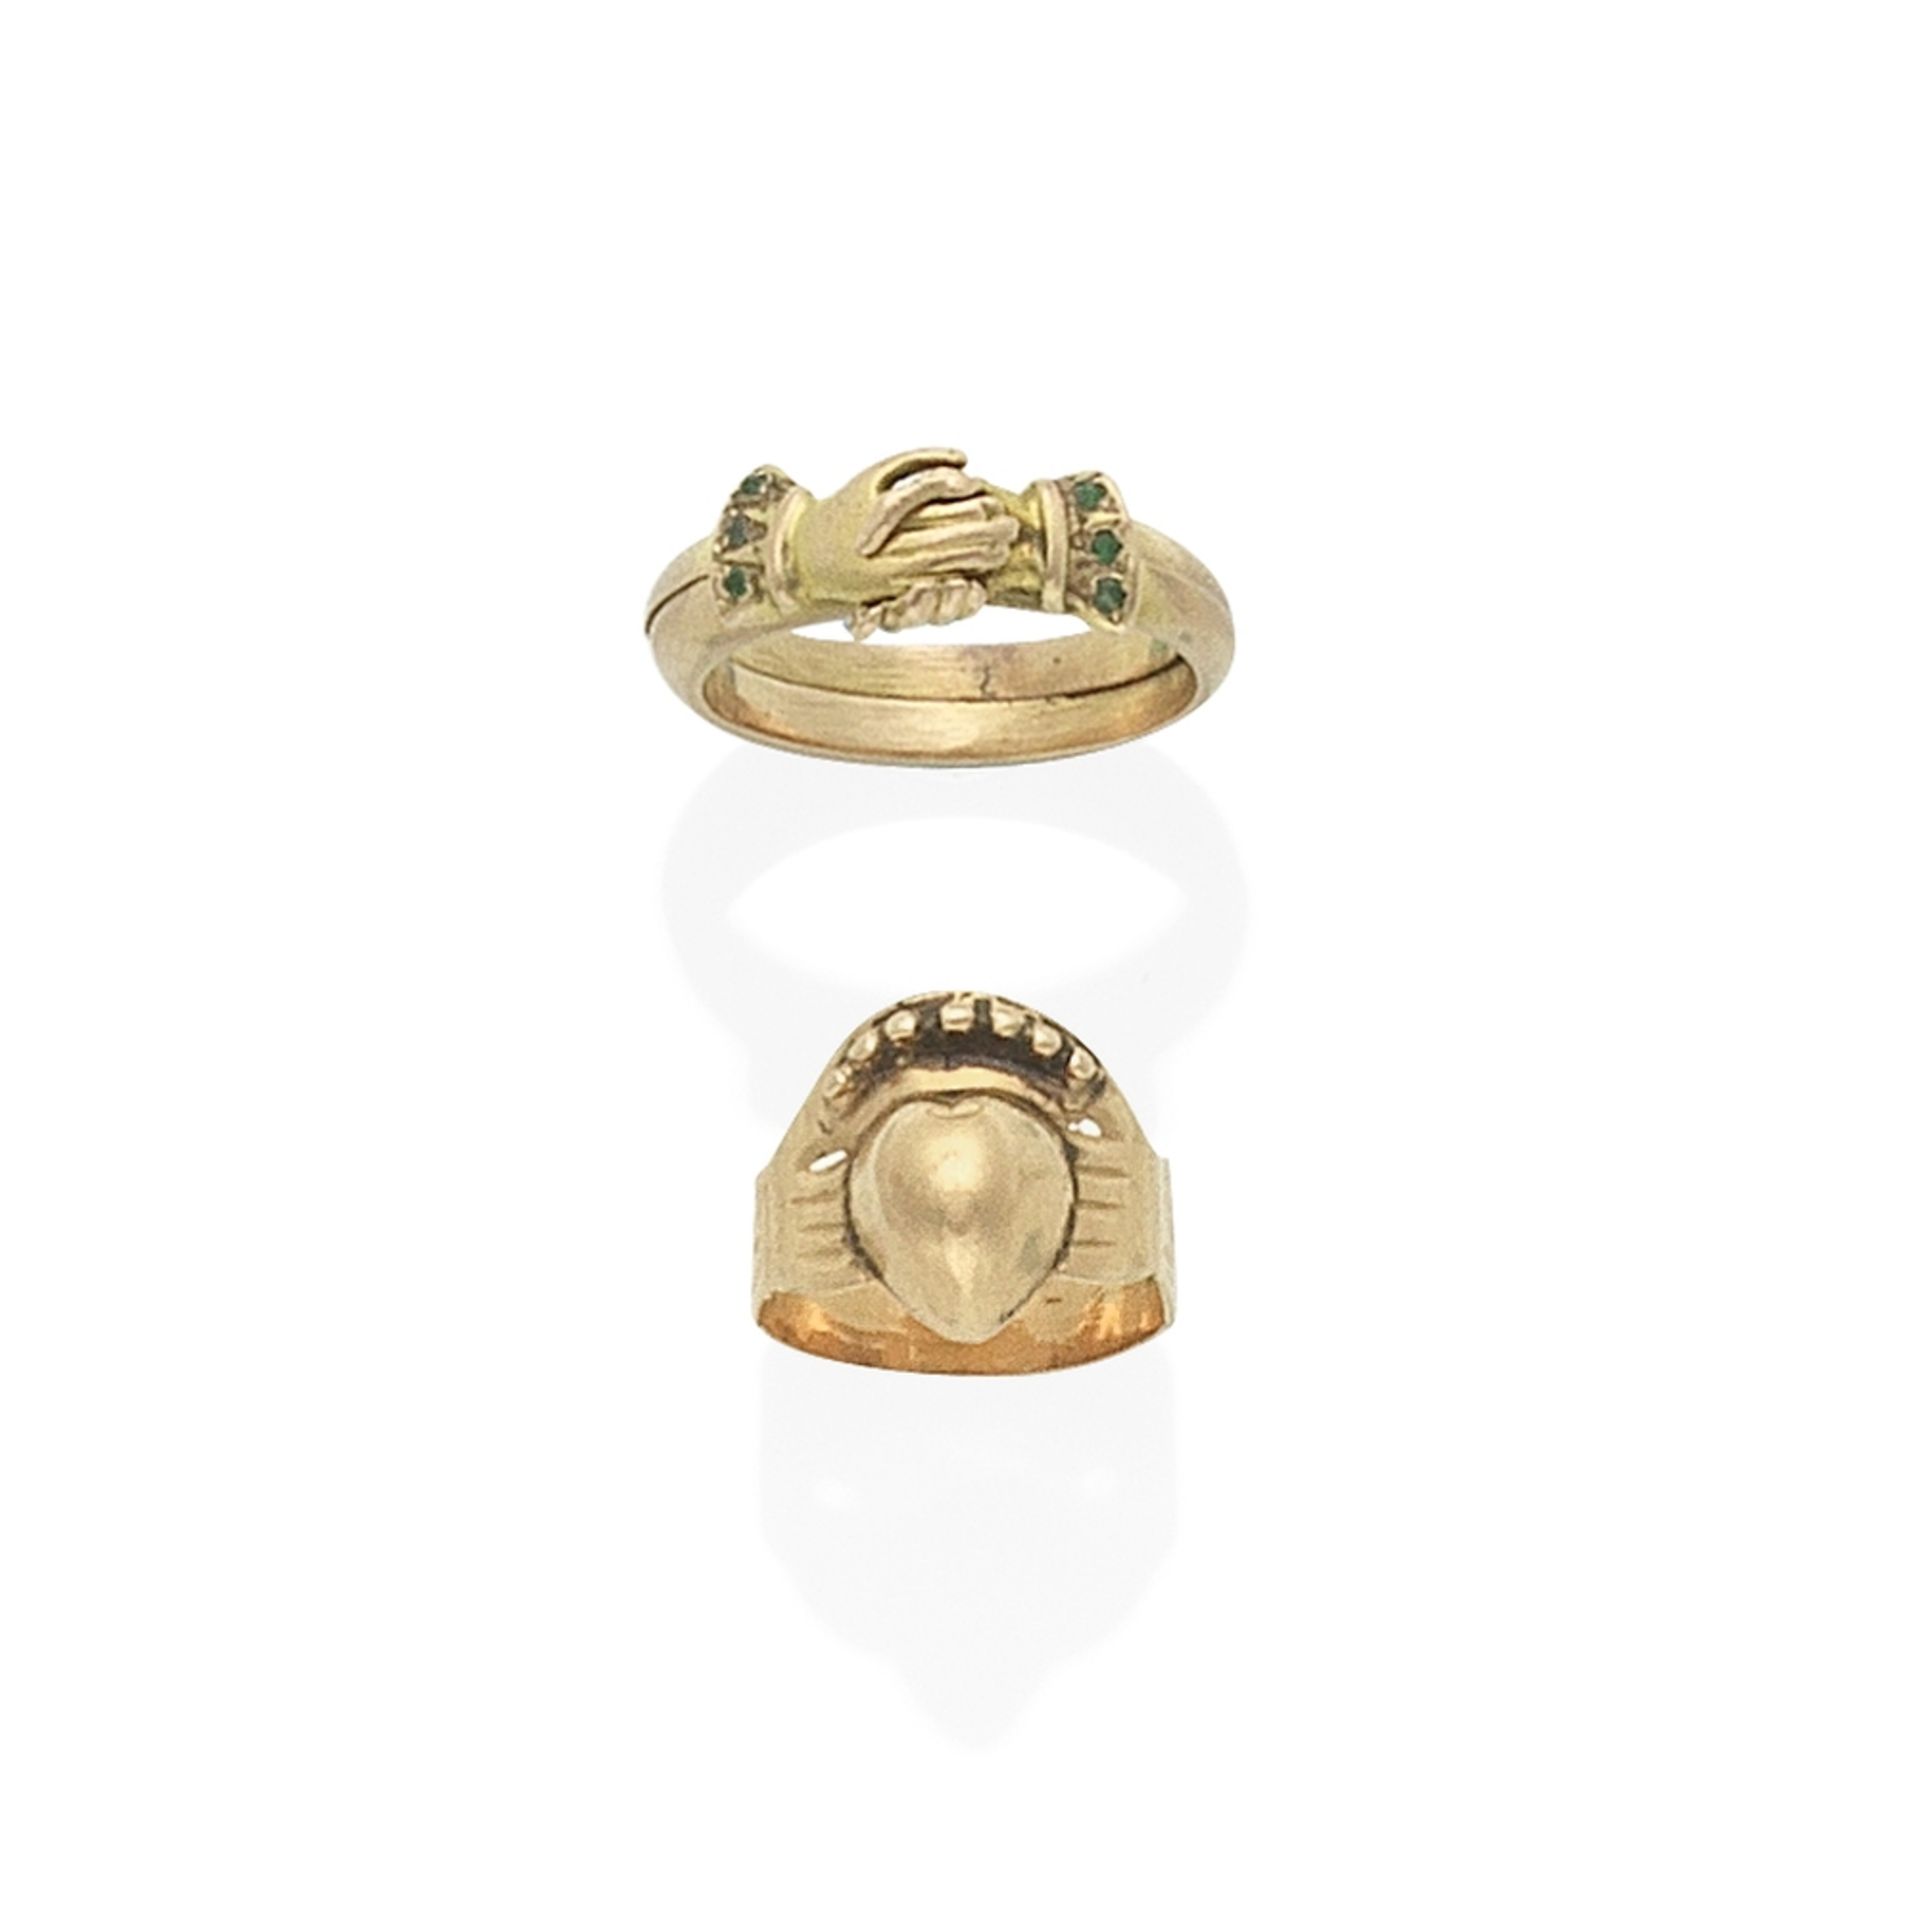 GOLD FEDE AND CLADDAGH RINGS, 19TH-20TH CENTURY (2)